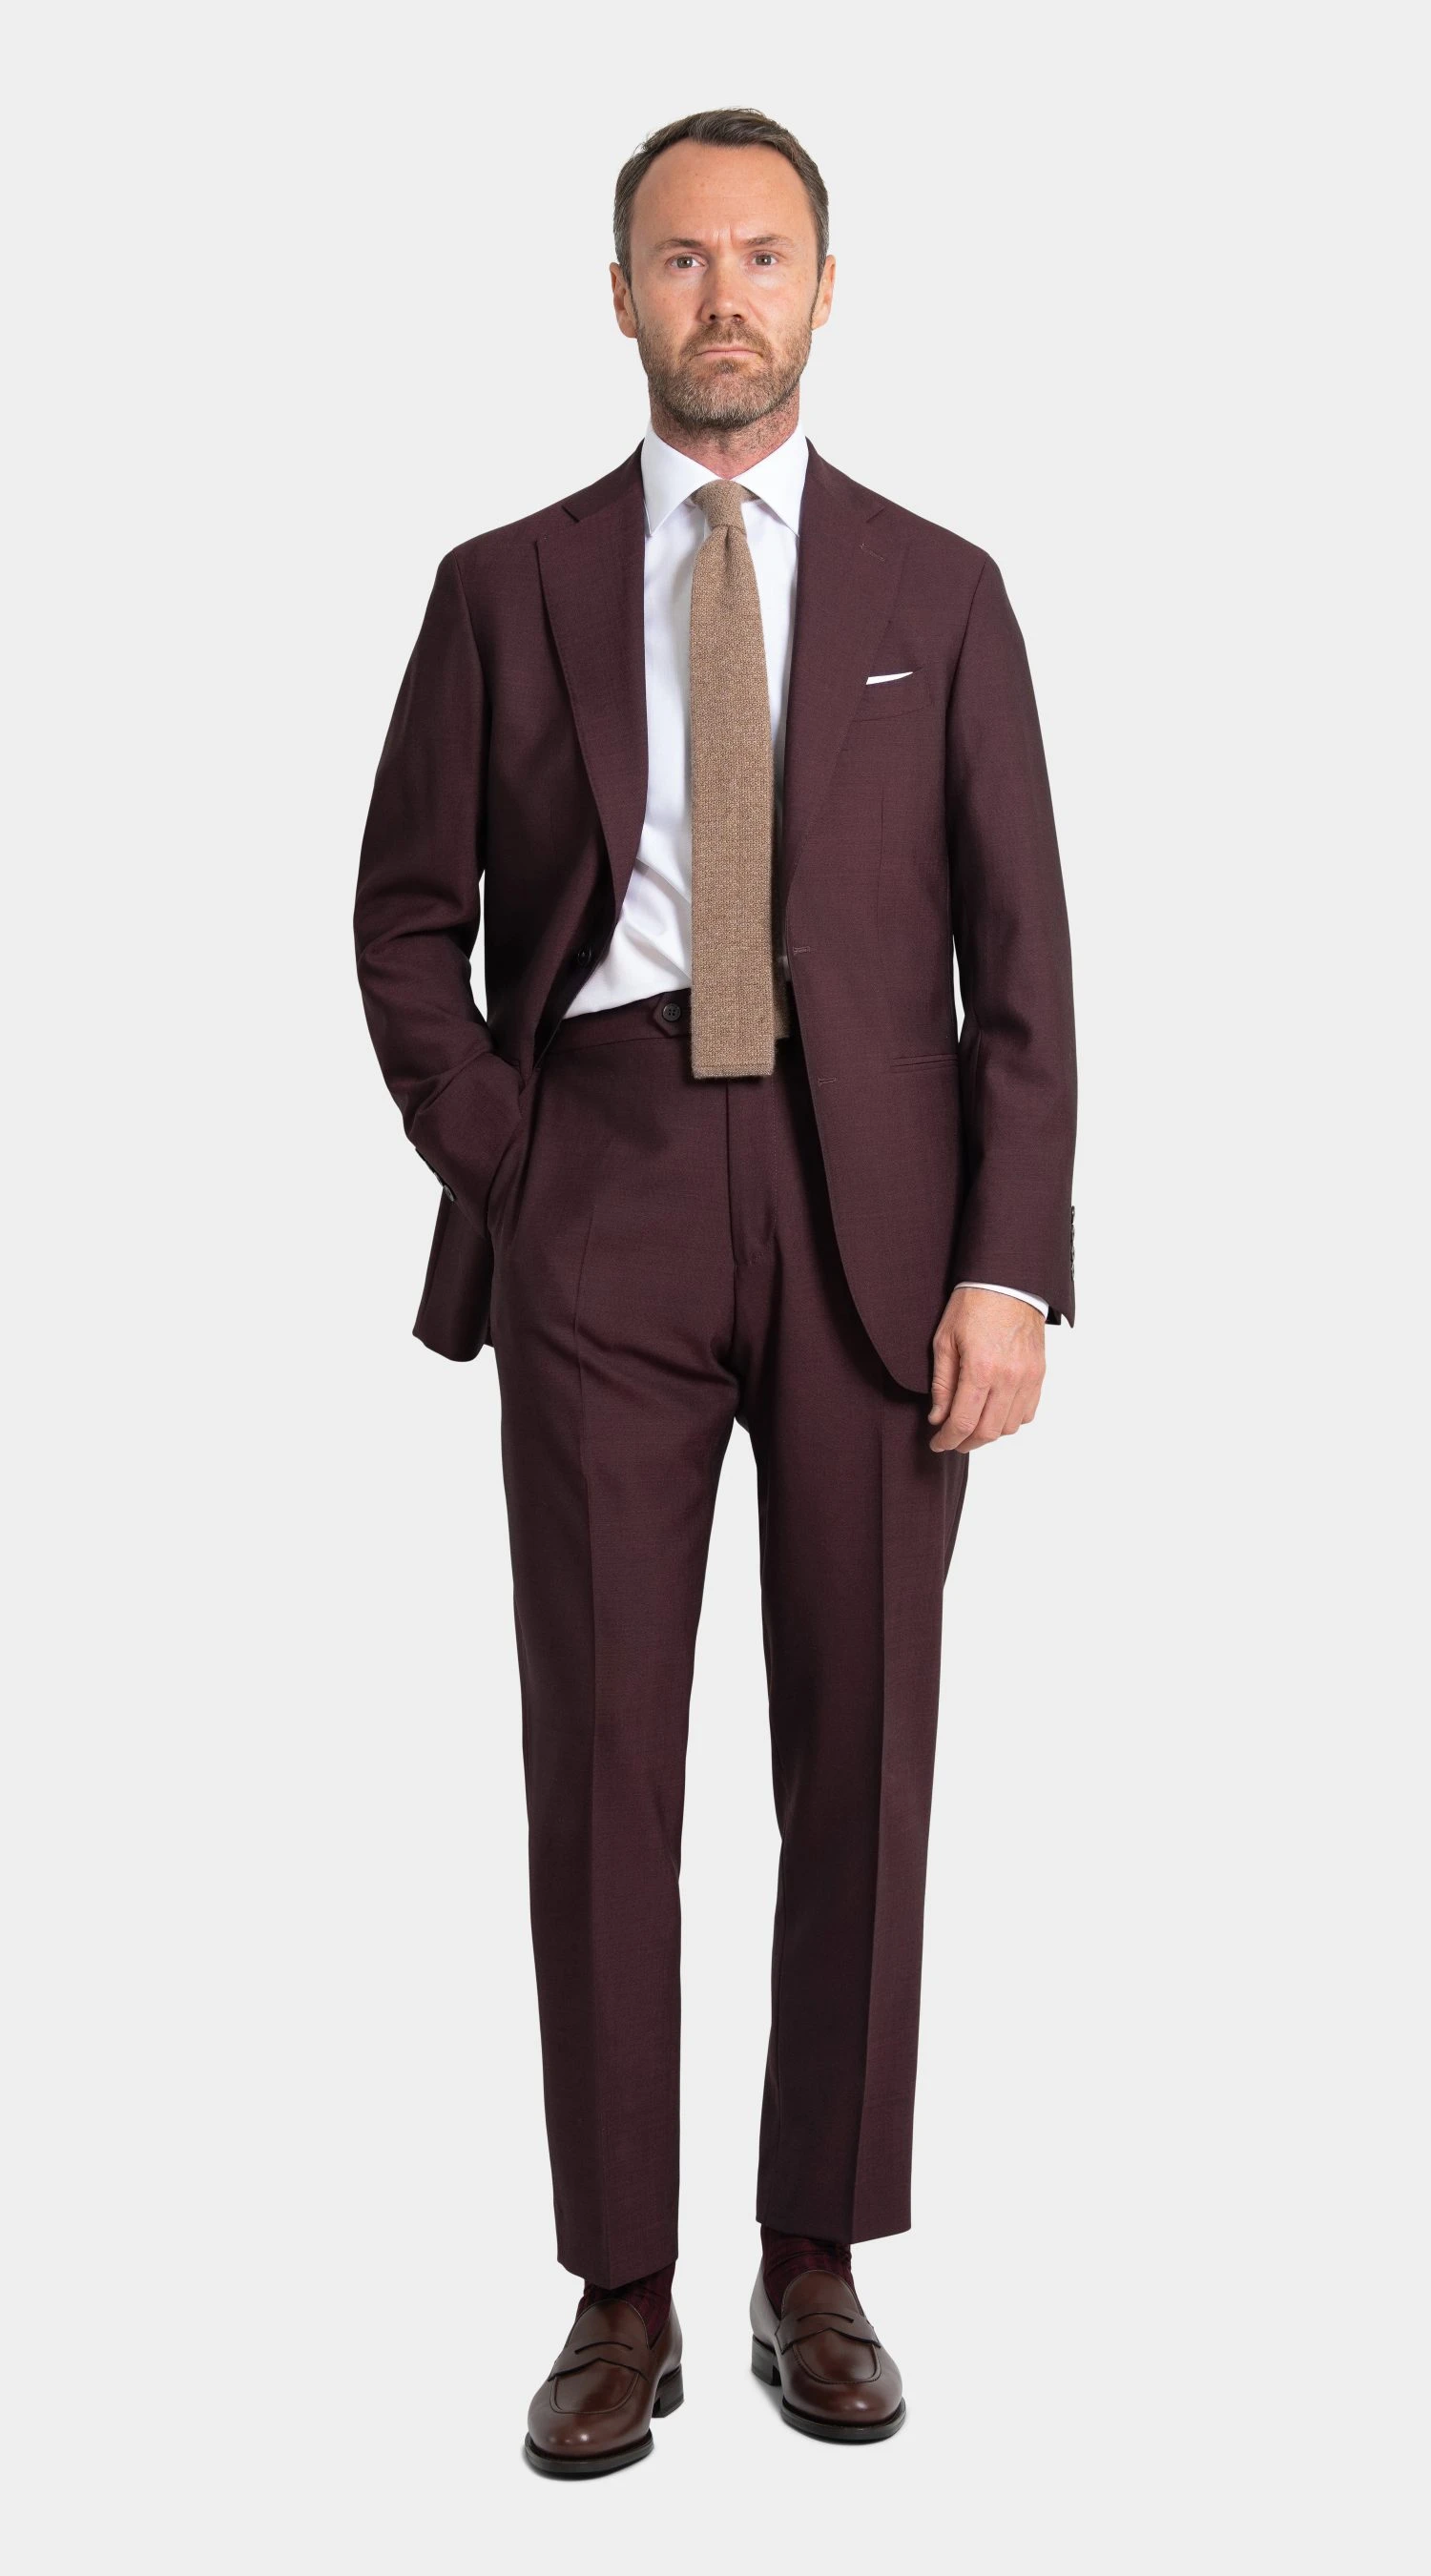 burgundy suit in twistair fabric, custom made by mond